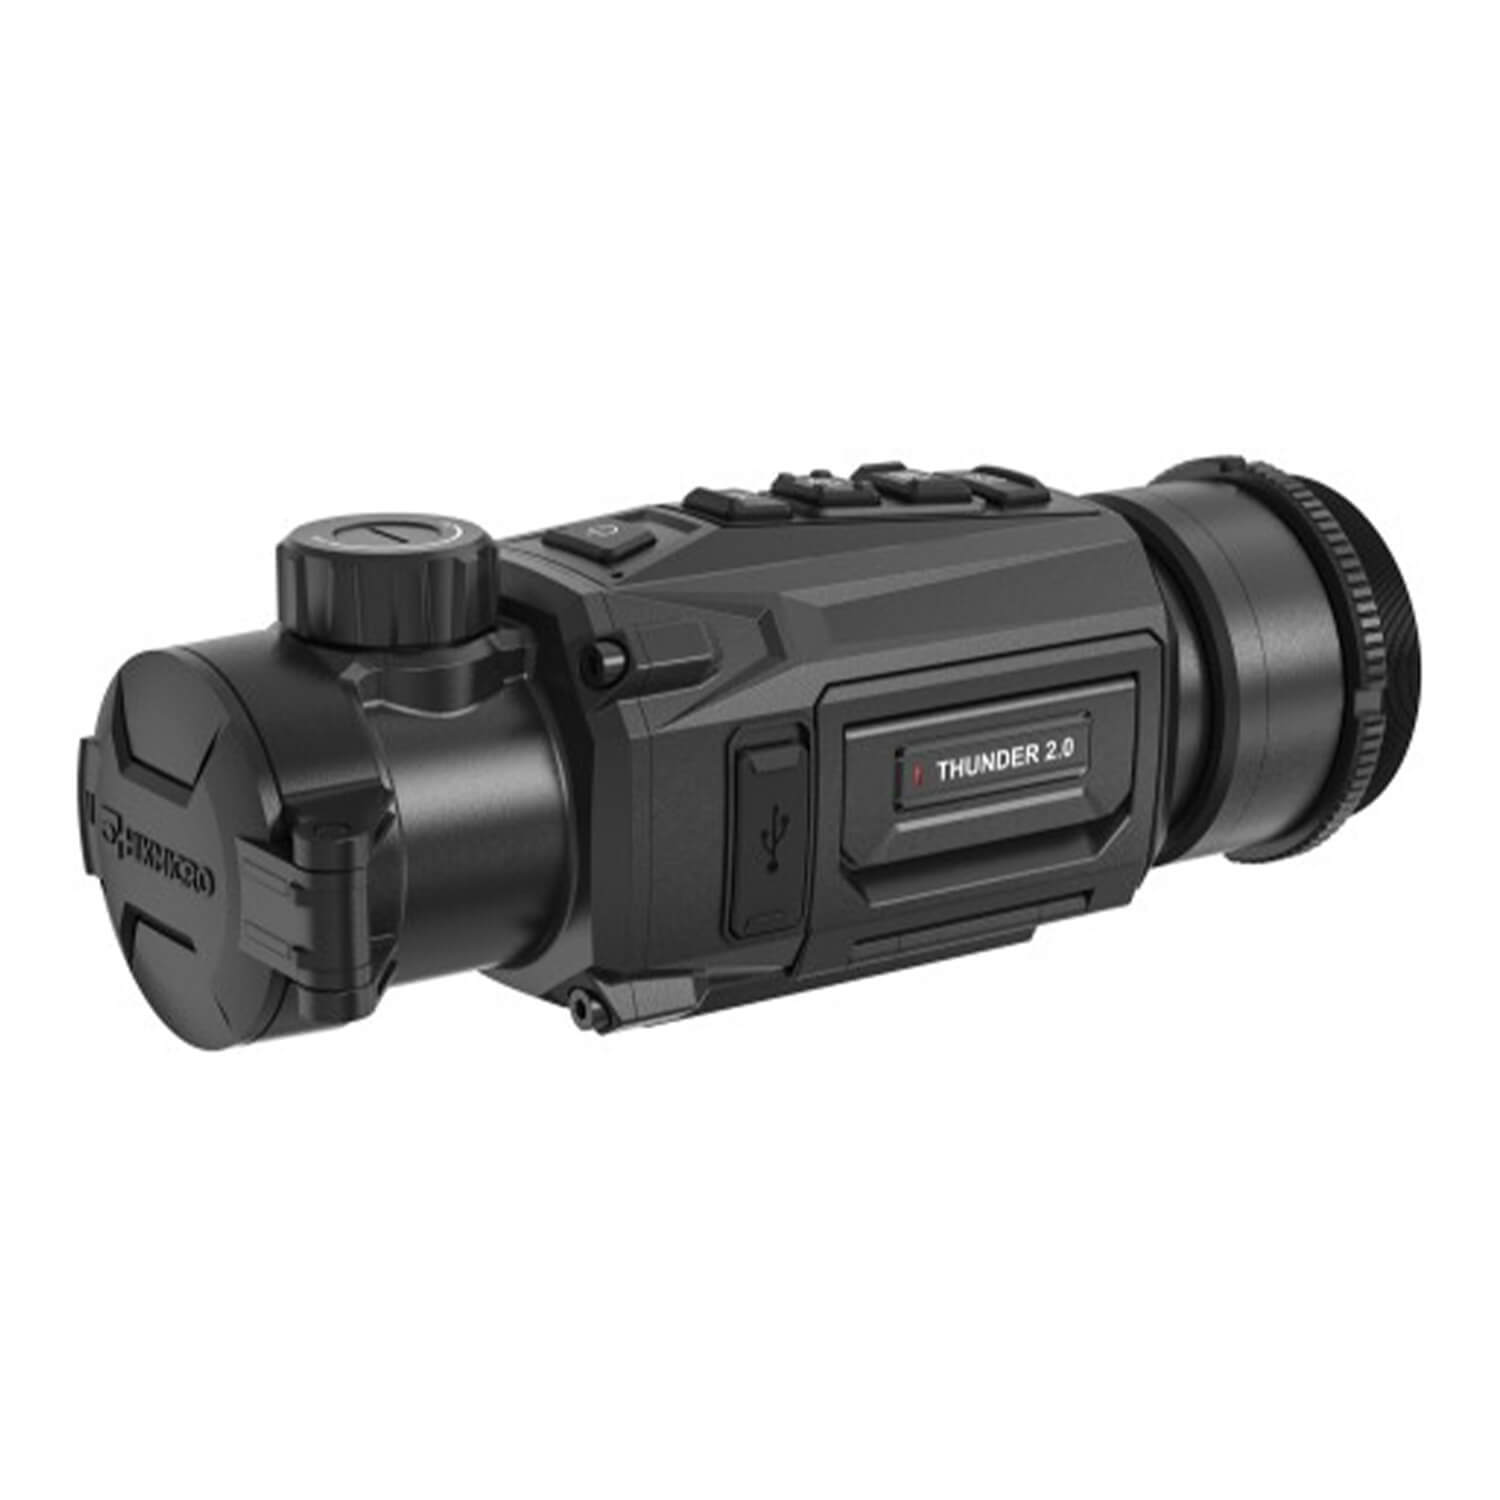 Hikmicro thermal imaging scope Thunder 2.0 TH35PC - Wild Boar Hunting